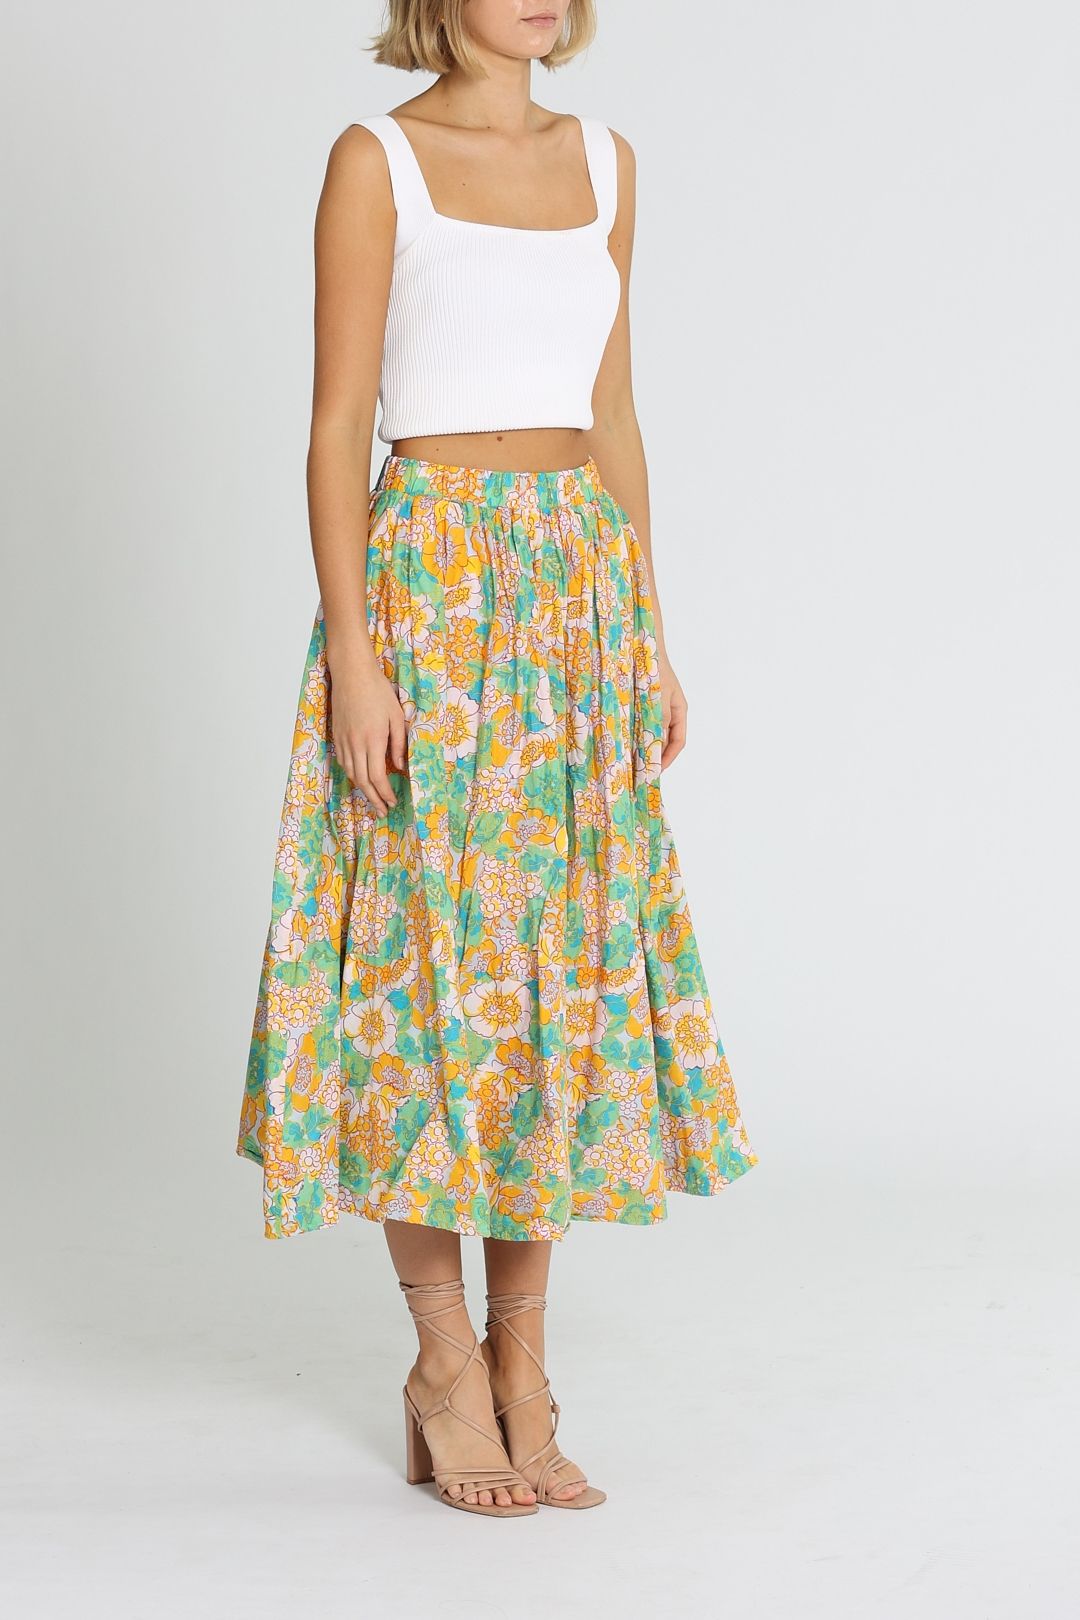 Bohemian Traders Circle Skirt With Wide Pocket Hem Multi Cotton Voile Midi